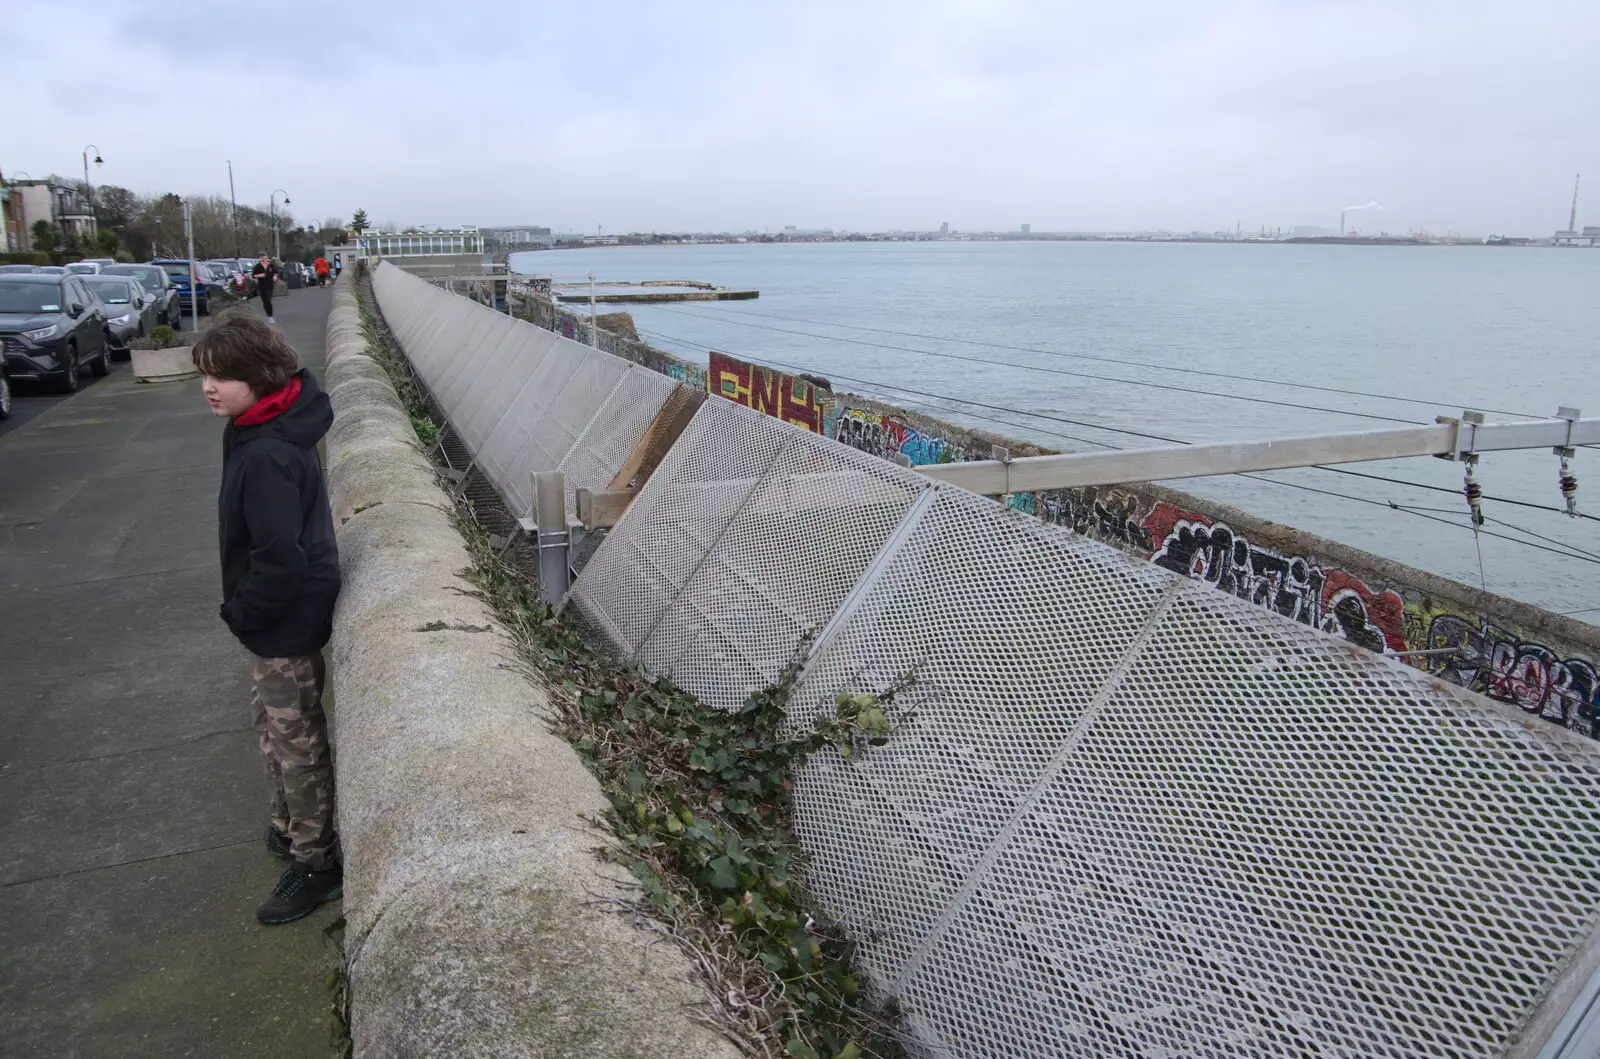 Fred leans on the wall on Idrone Terrace, from The End of the Breffni, Blackrock, Dublin - 18th February 2023